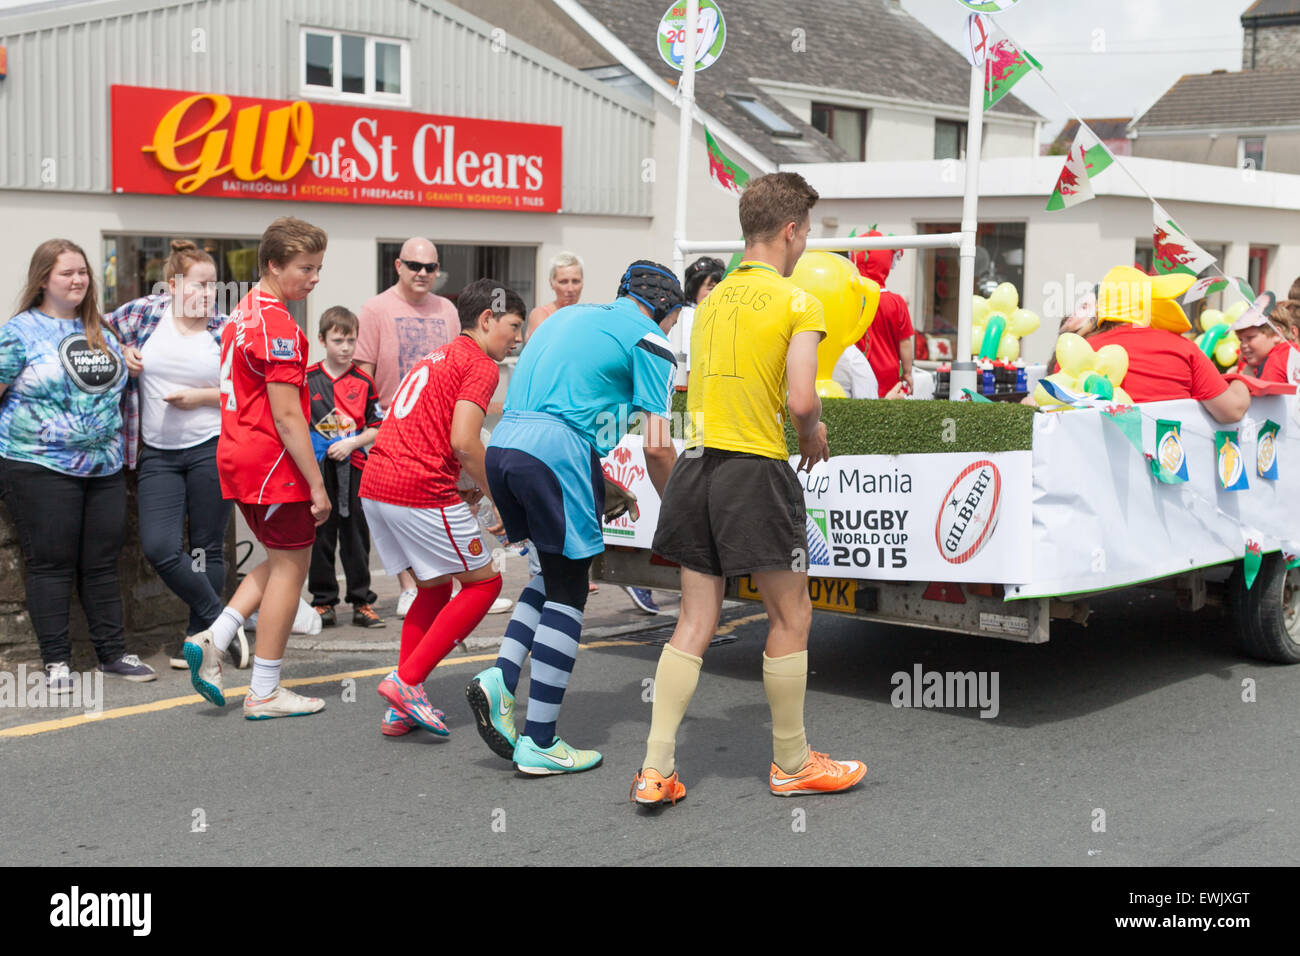 St Clears Carnival June 2015 in Pembrokeshire Wales.  Town parade. Stock Photo